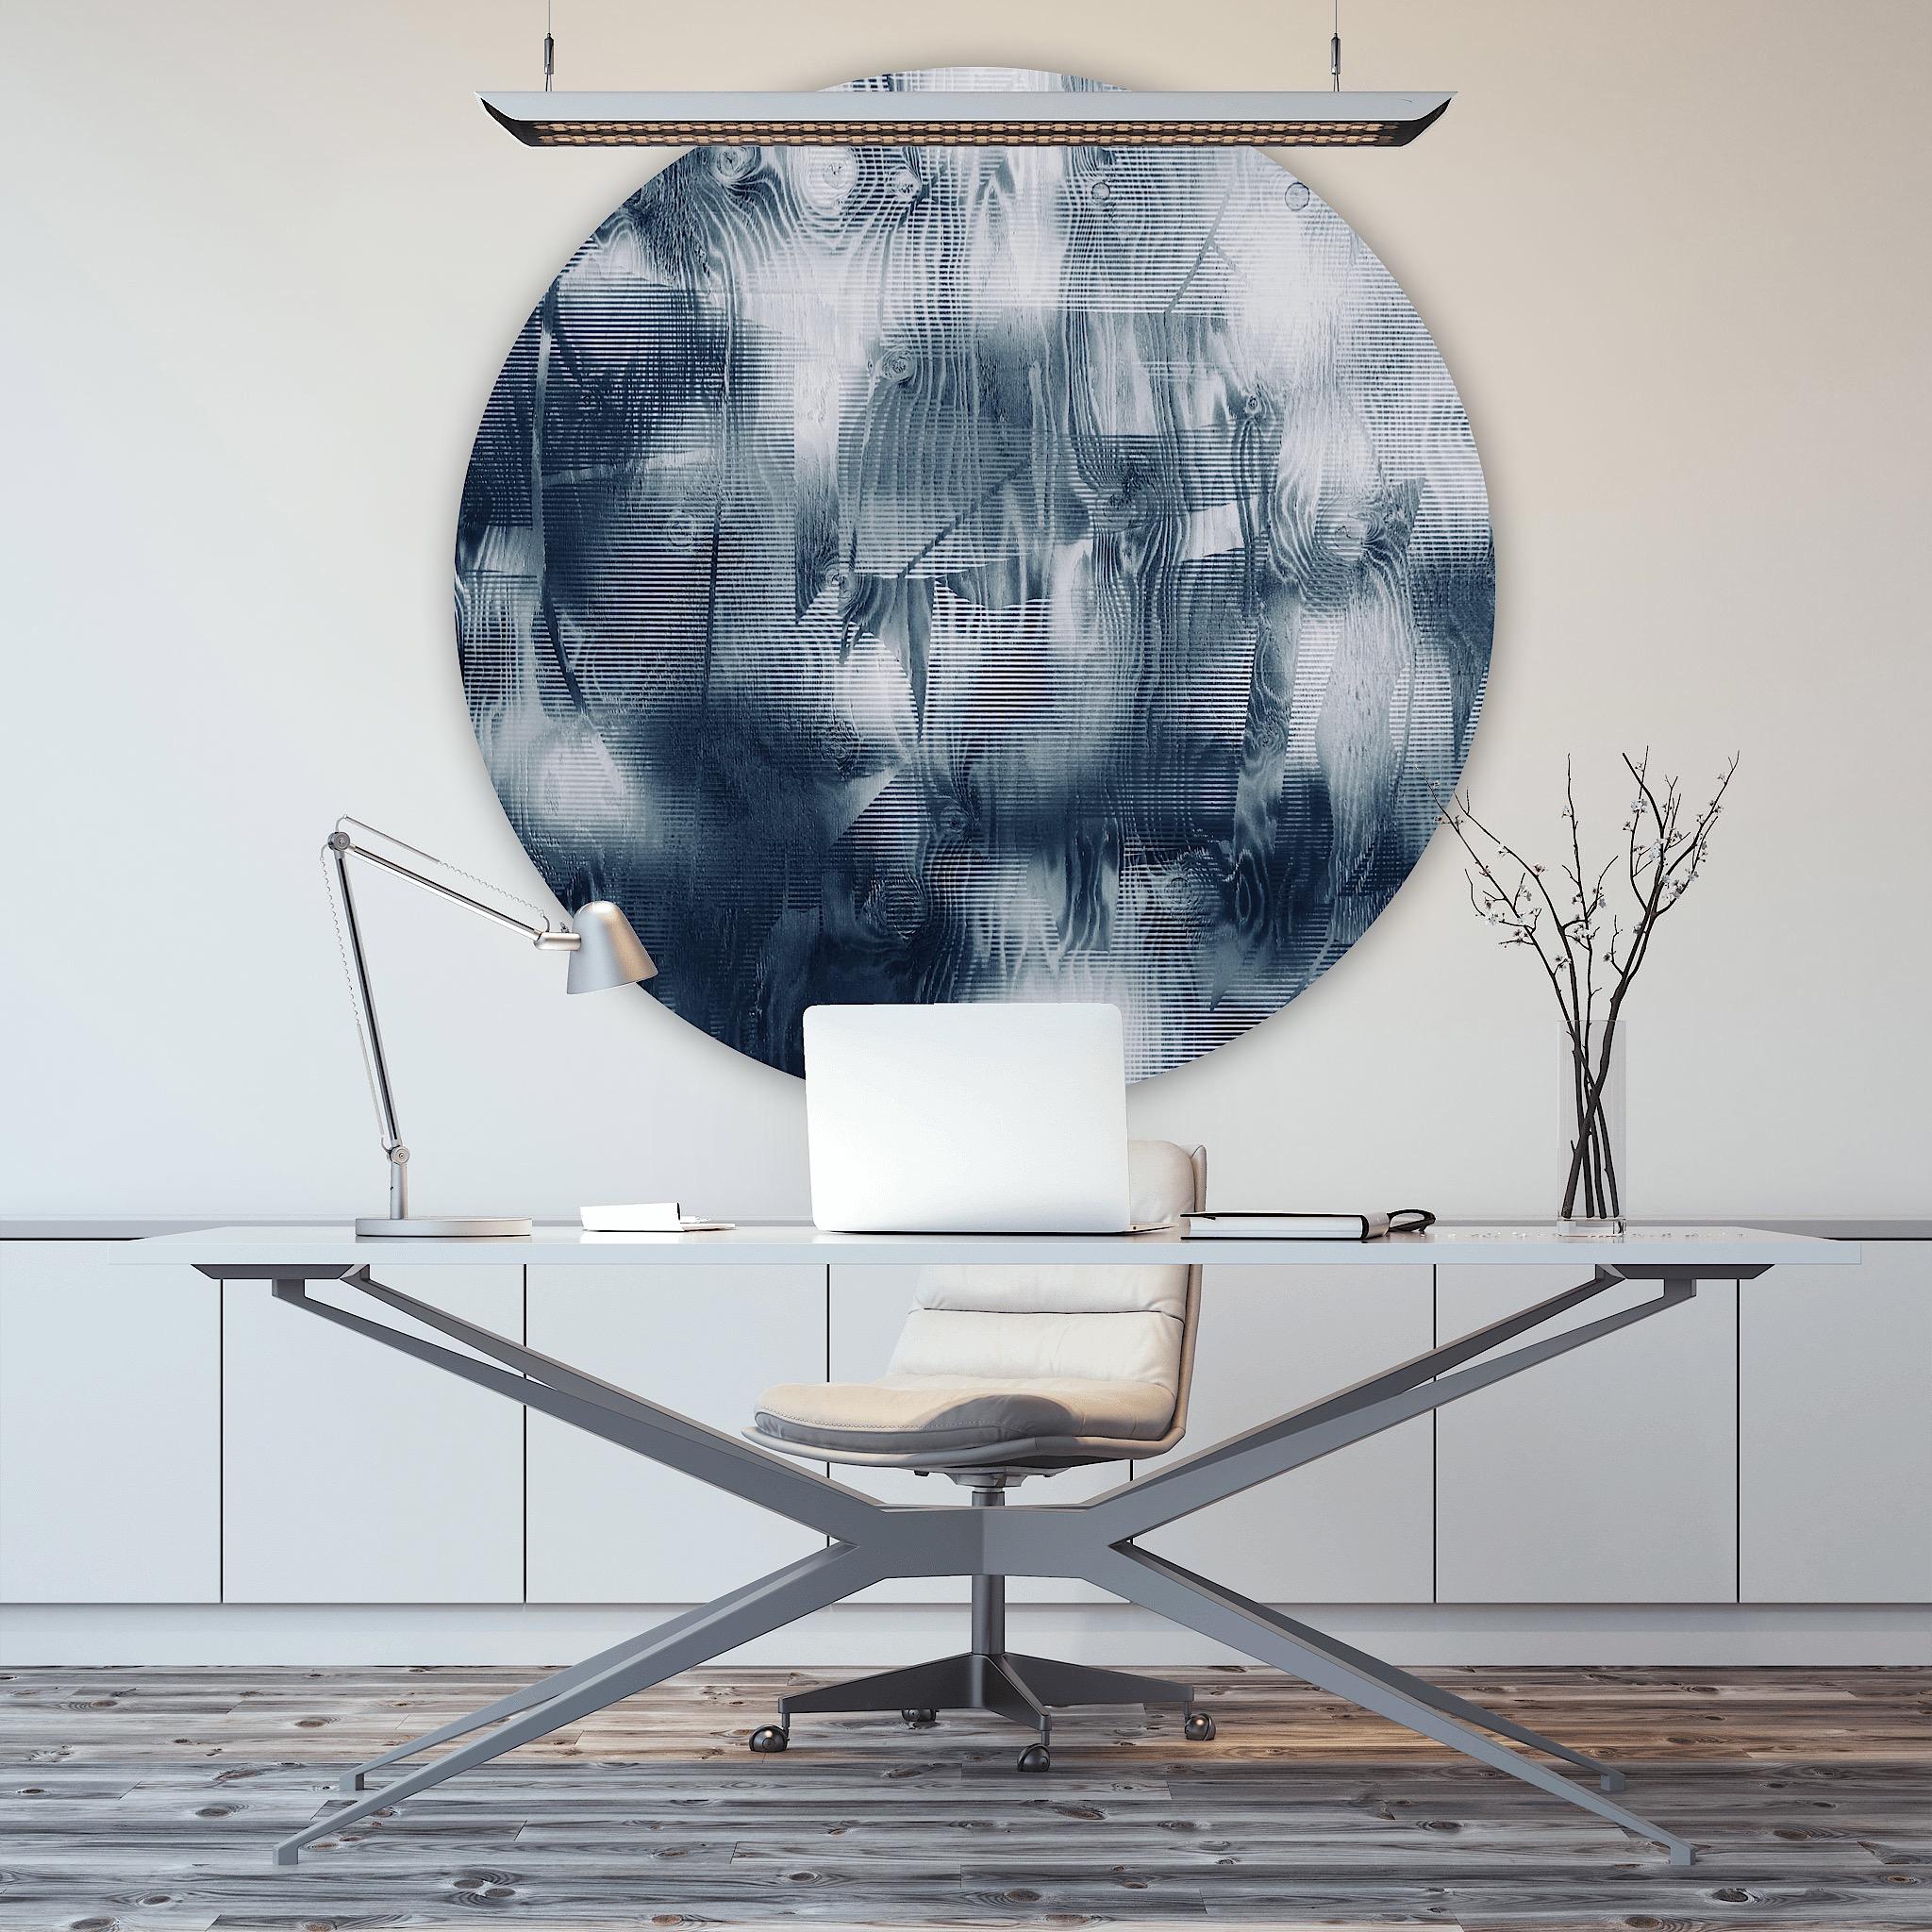 Screen tbd8  (tondo round denim blue grid art deco painting abstract geometric)  - Gray Abstract Painting by Melisa Taylor Metzger